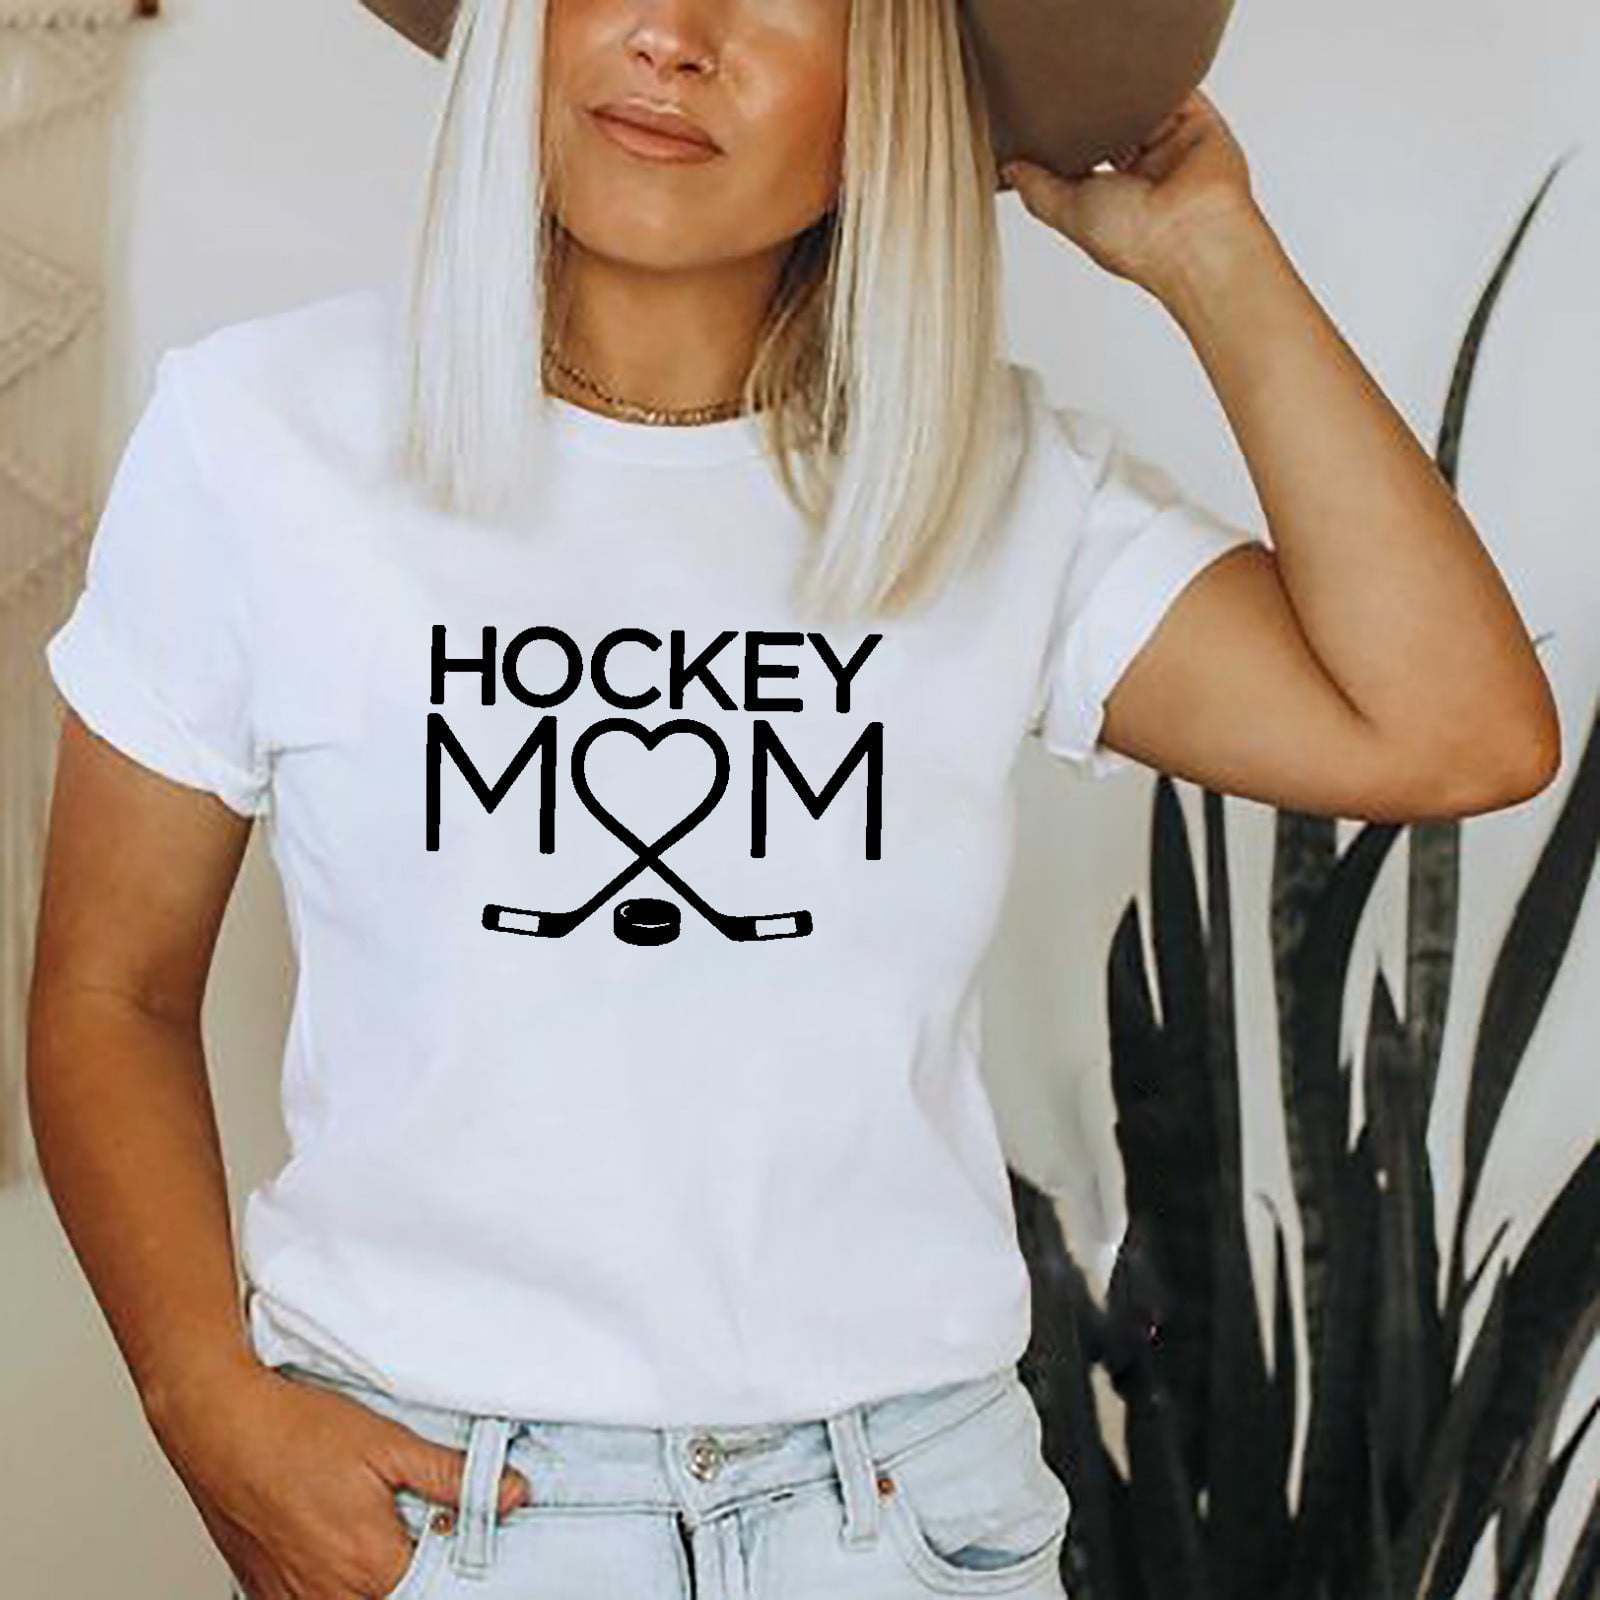 The Dos And Don'ts Of Hockey Fashion